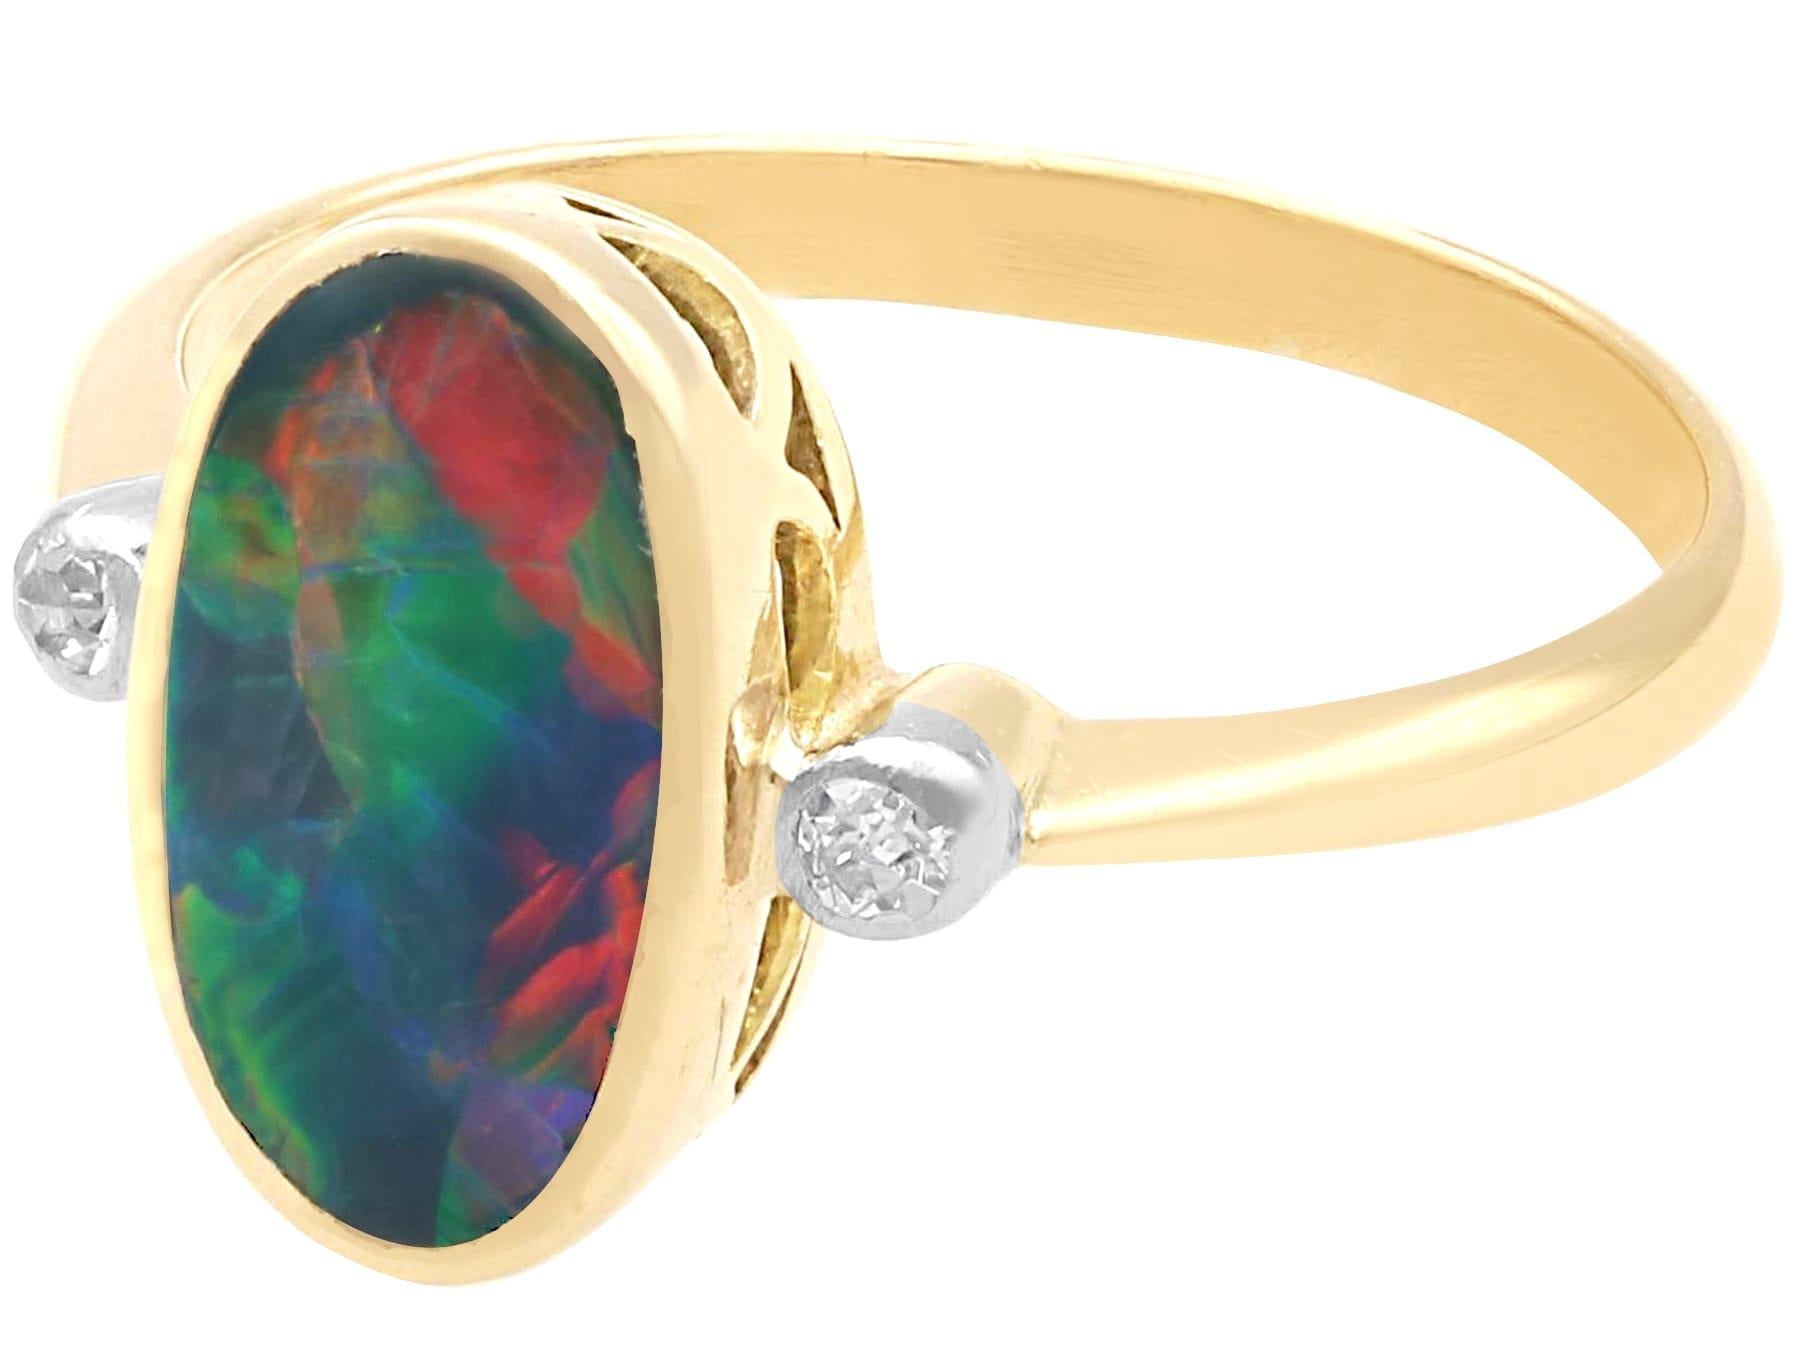 Cabochon Antique 1.35ct Black Opal and Diamond Cocktail Ring in 18ct Yellow Gold